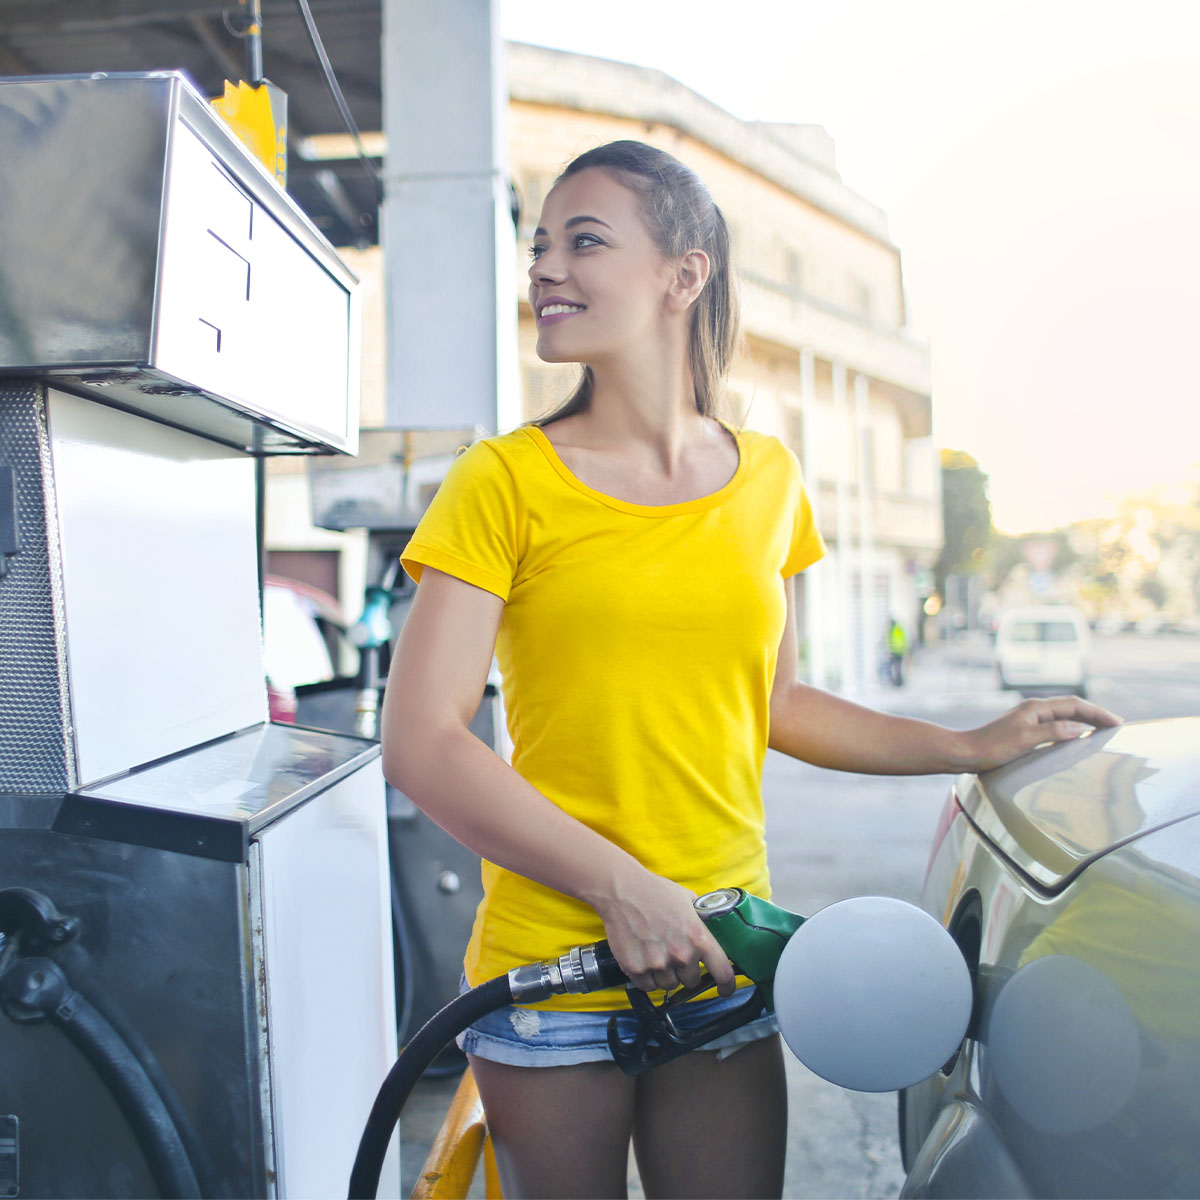 Young woman pumping gas into her car